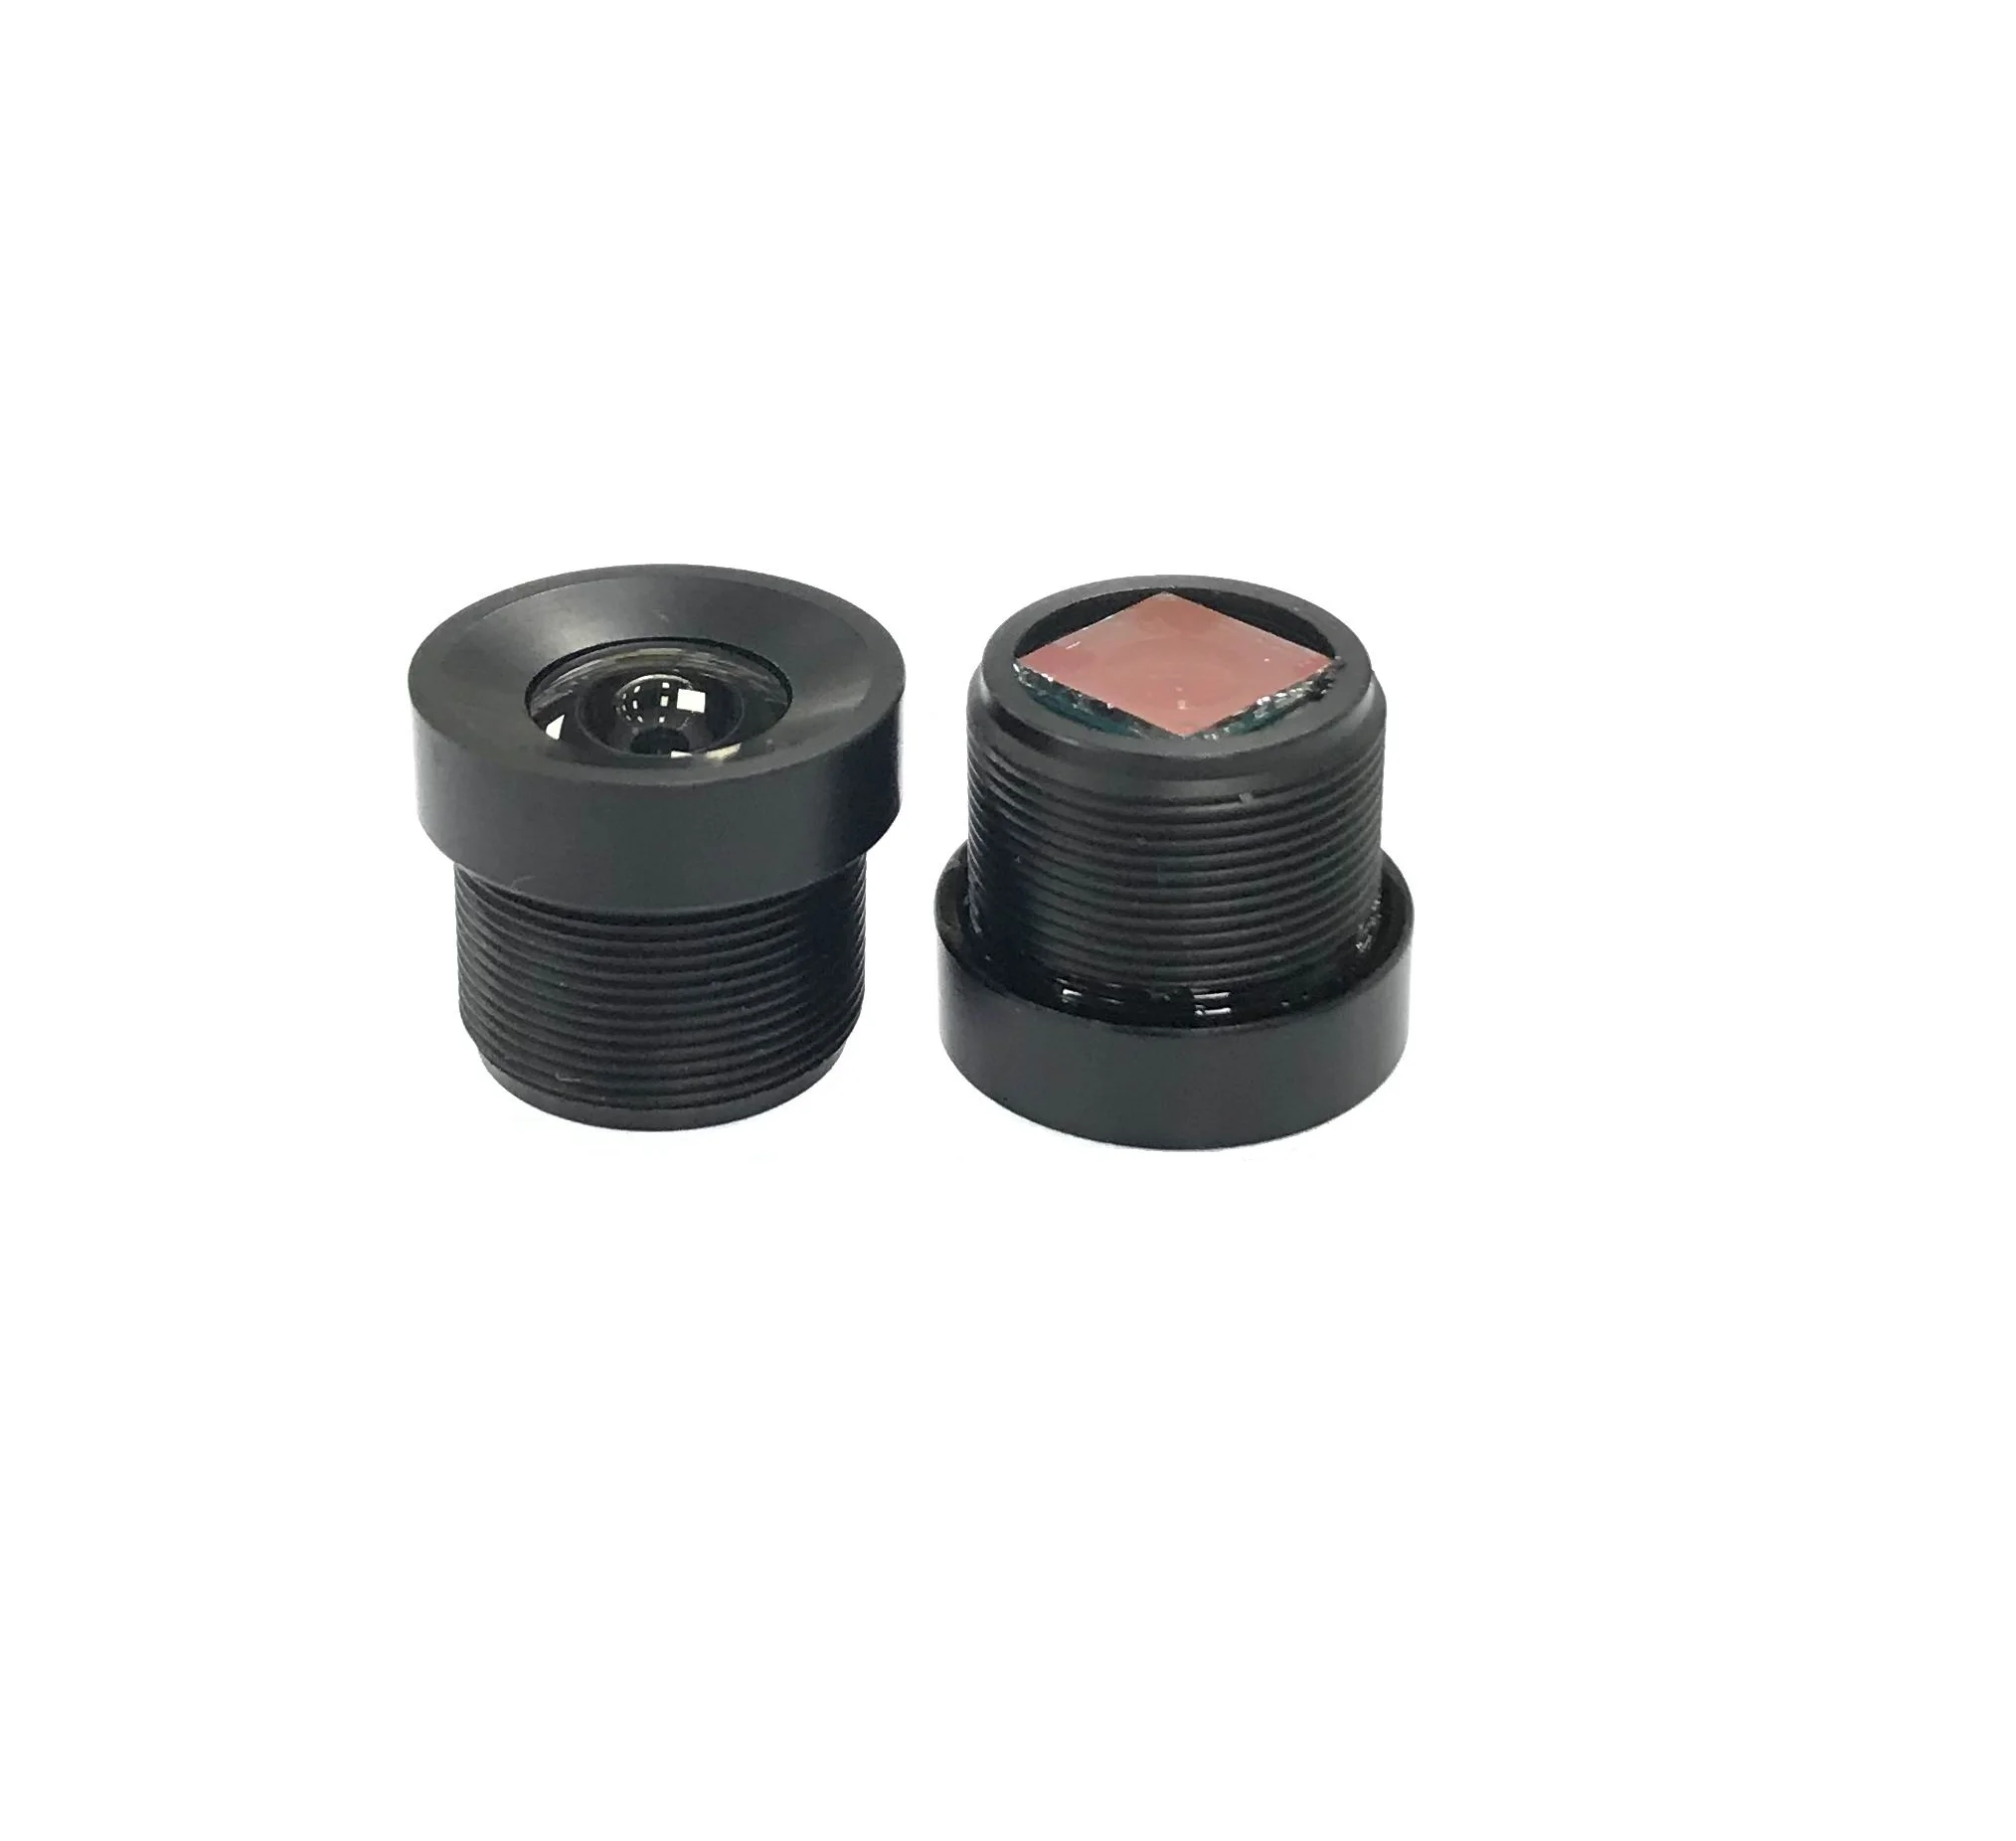 

3MP 4.3mm Lens 1/2.7" IR Micro-Distortion F2.5 M12 for Gopro for Usb Camera Cctv Lens with 940nm 850nm Narrow Band Filter